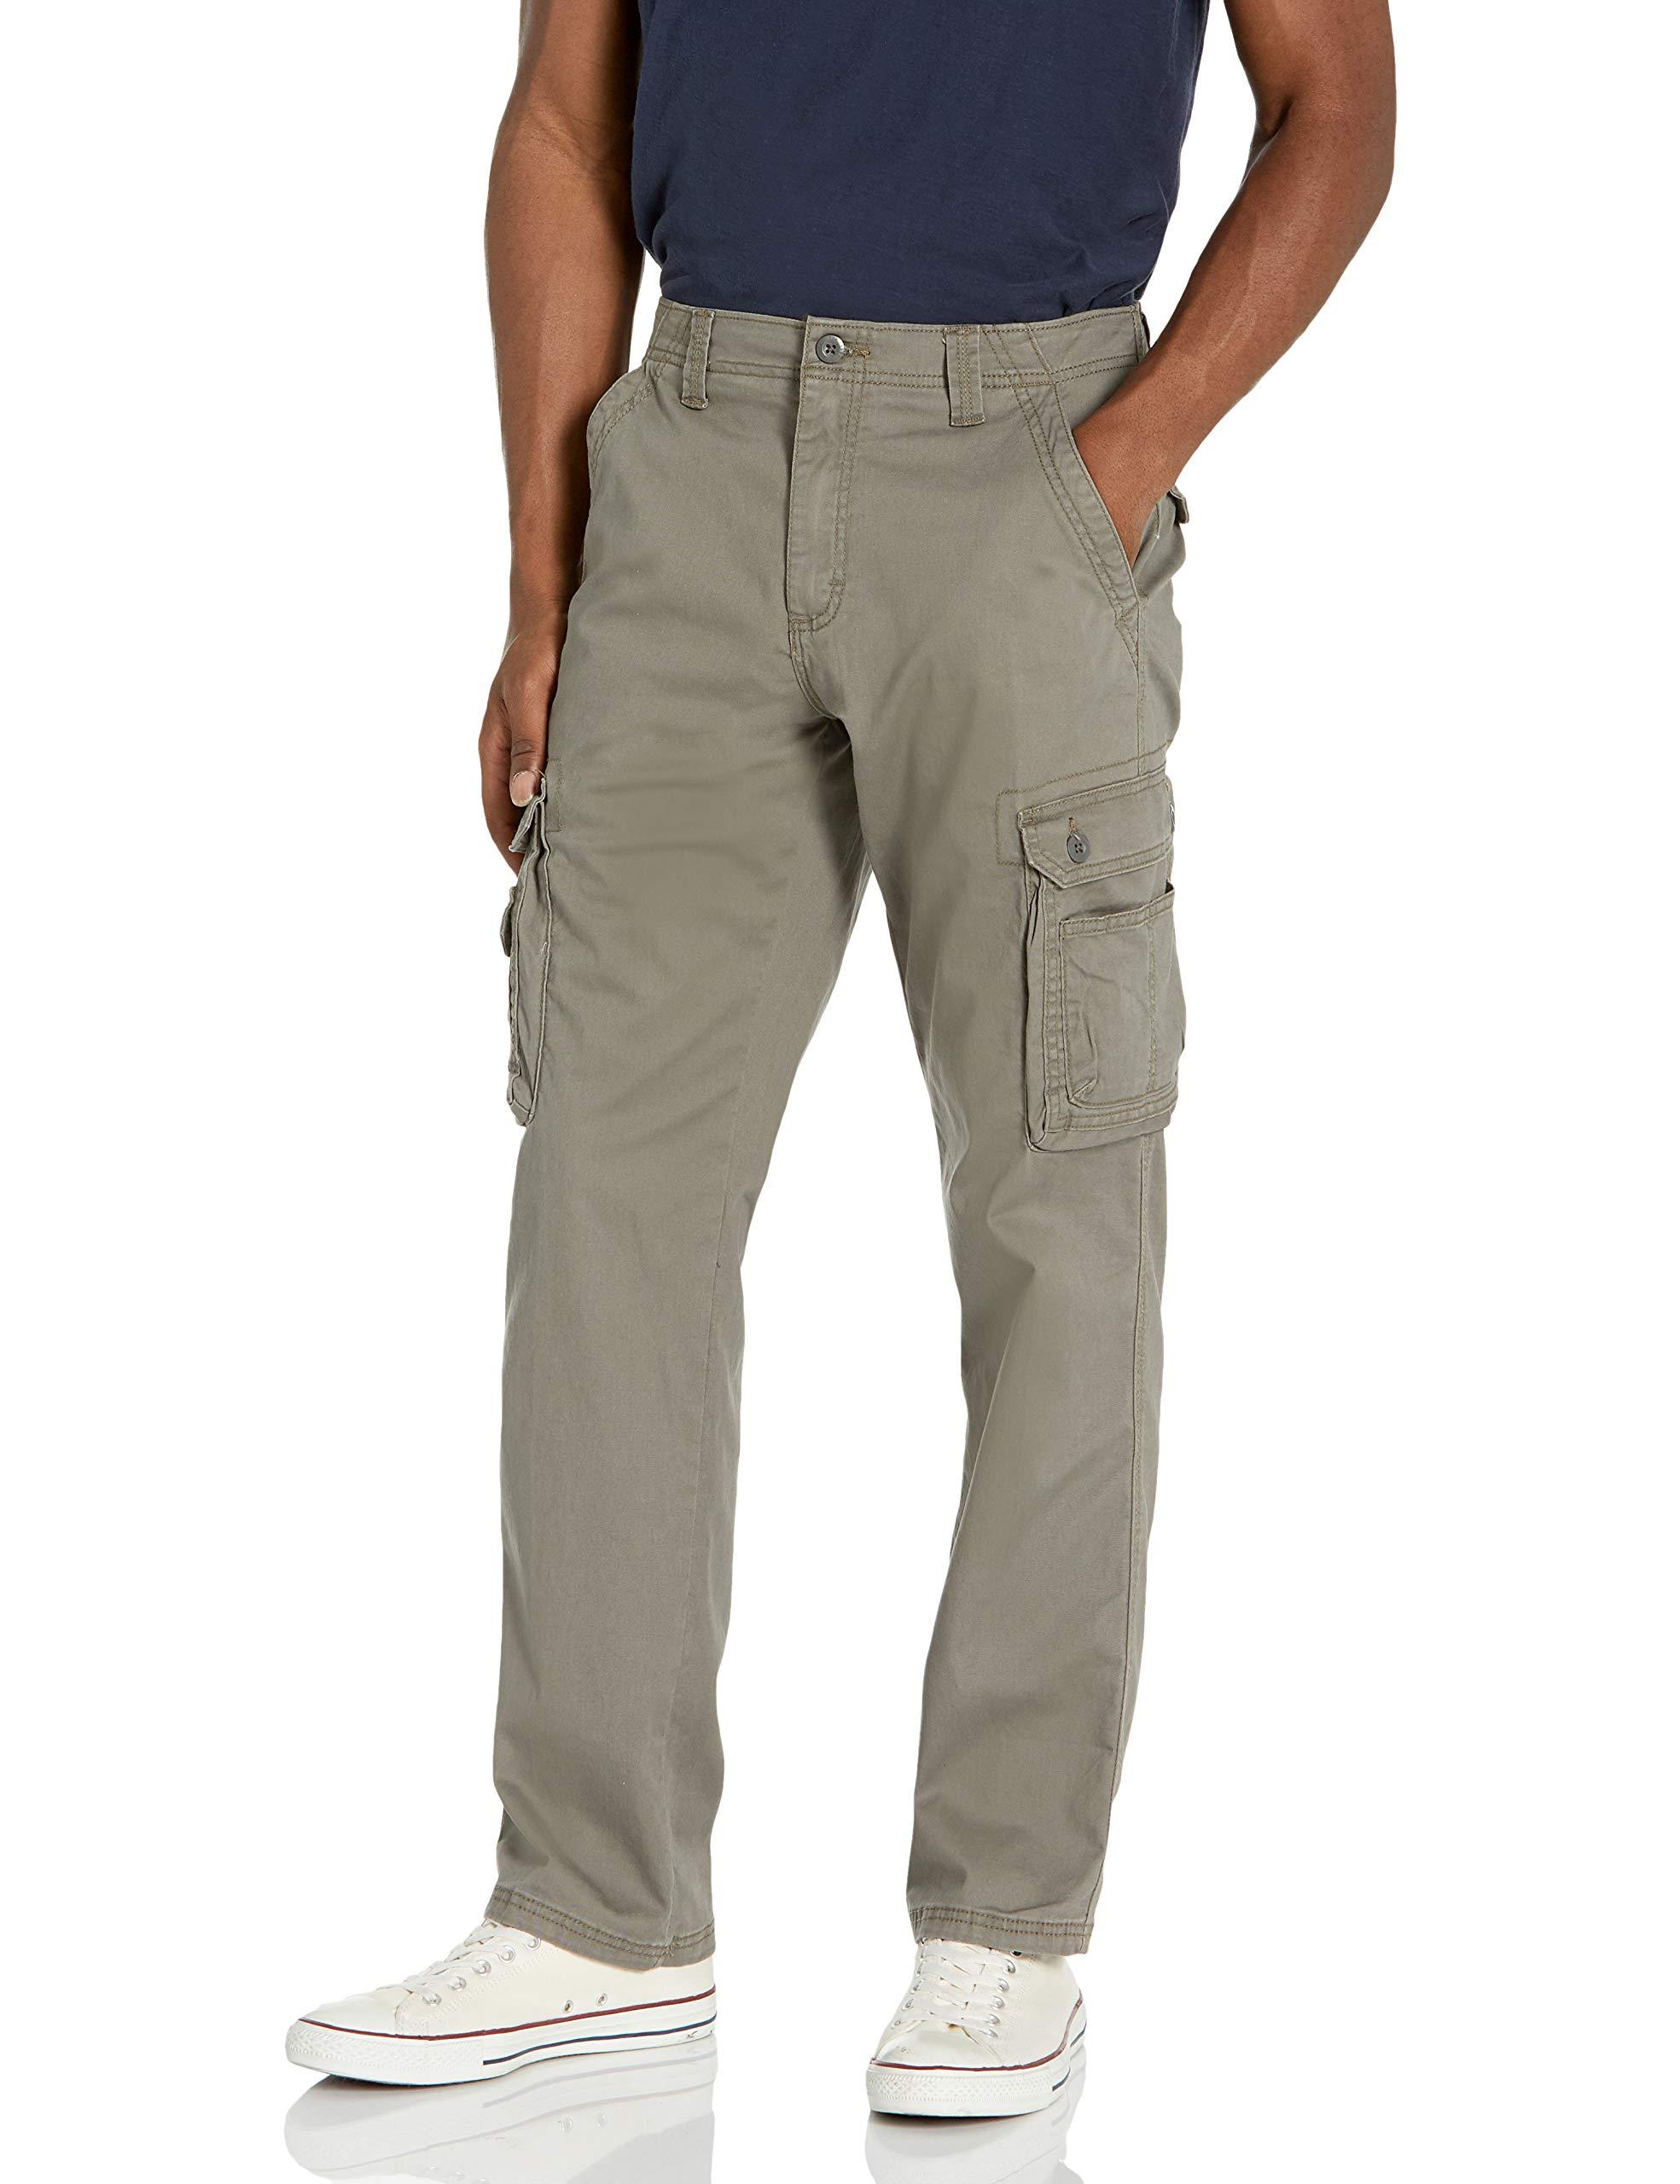 Lee Jeans Cotton Wyoming Relaxed Fit Cargo Pant for Men - Lyst